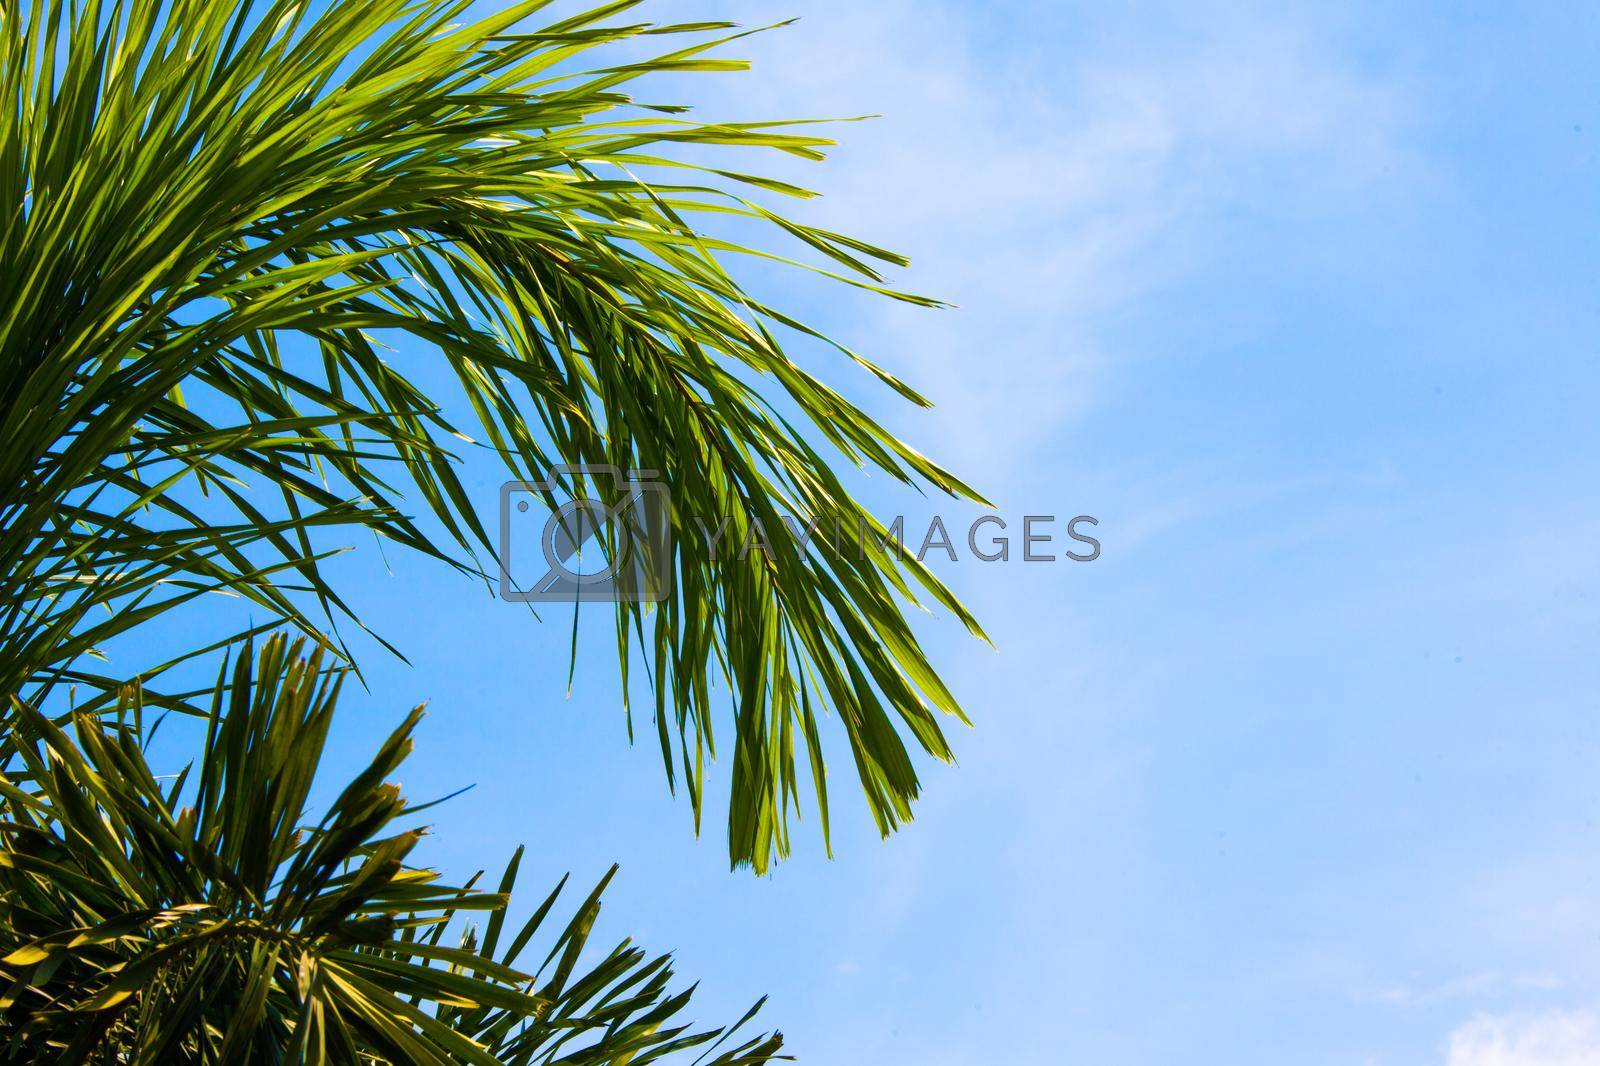 Royalty free image of Palm trees in the blue sky by Yellowj